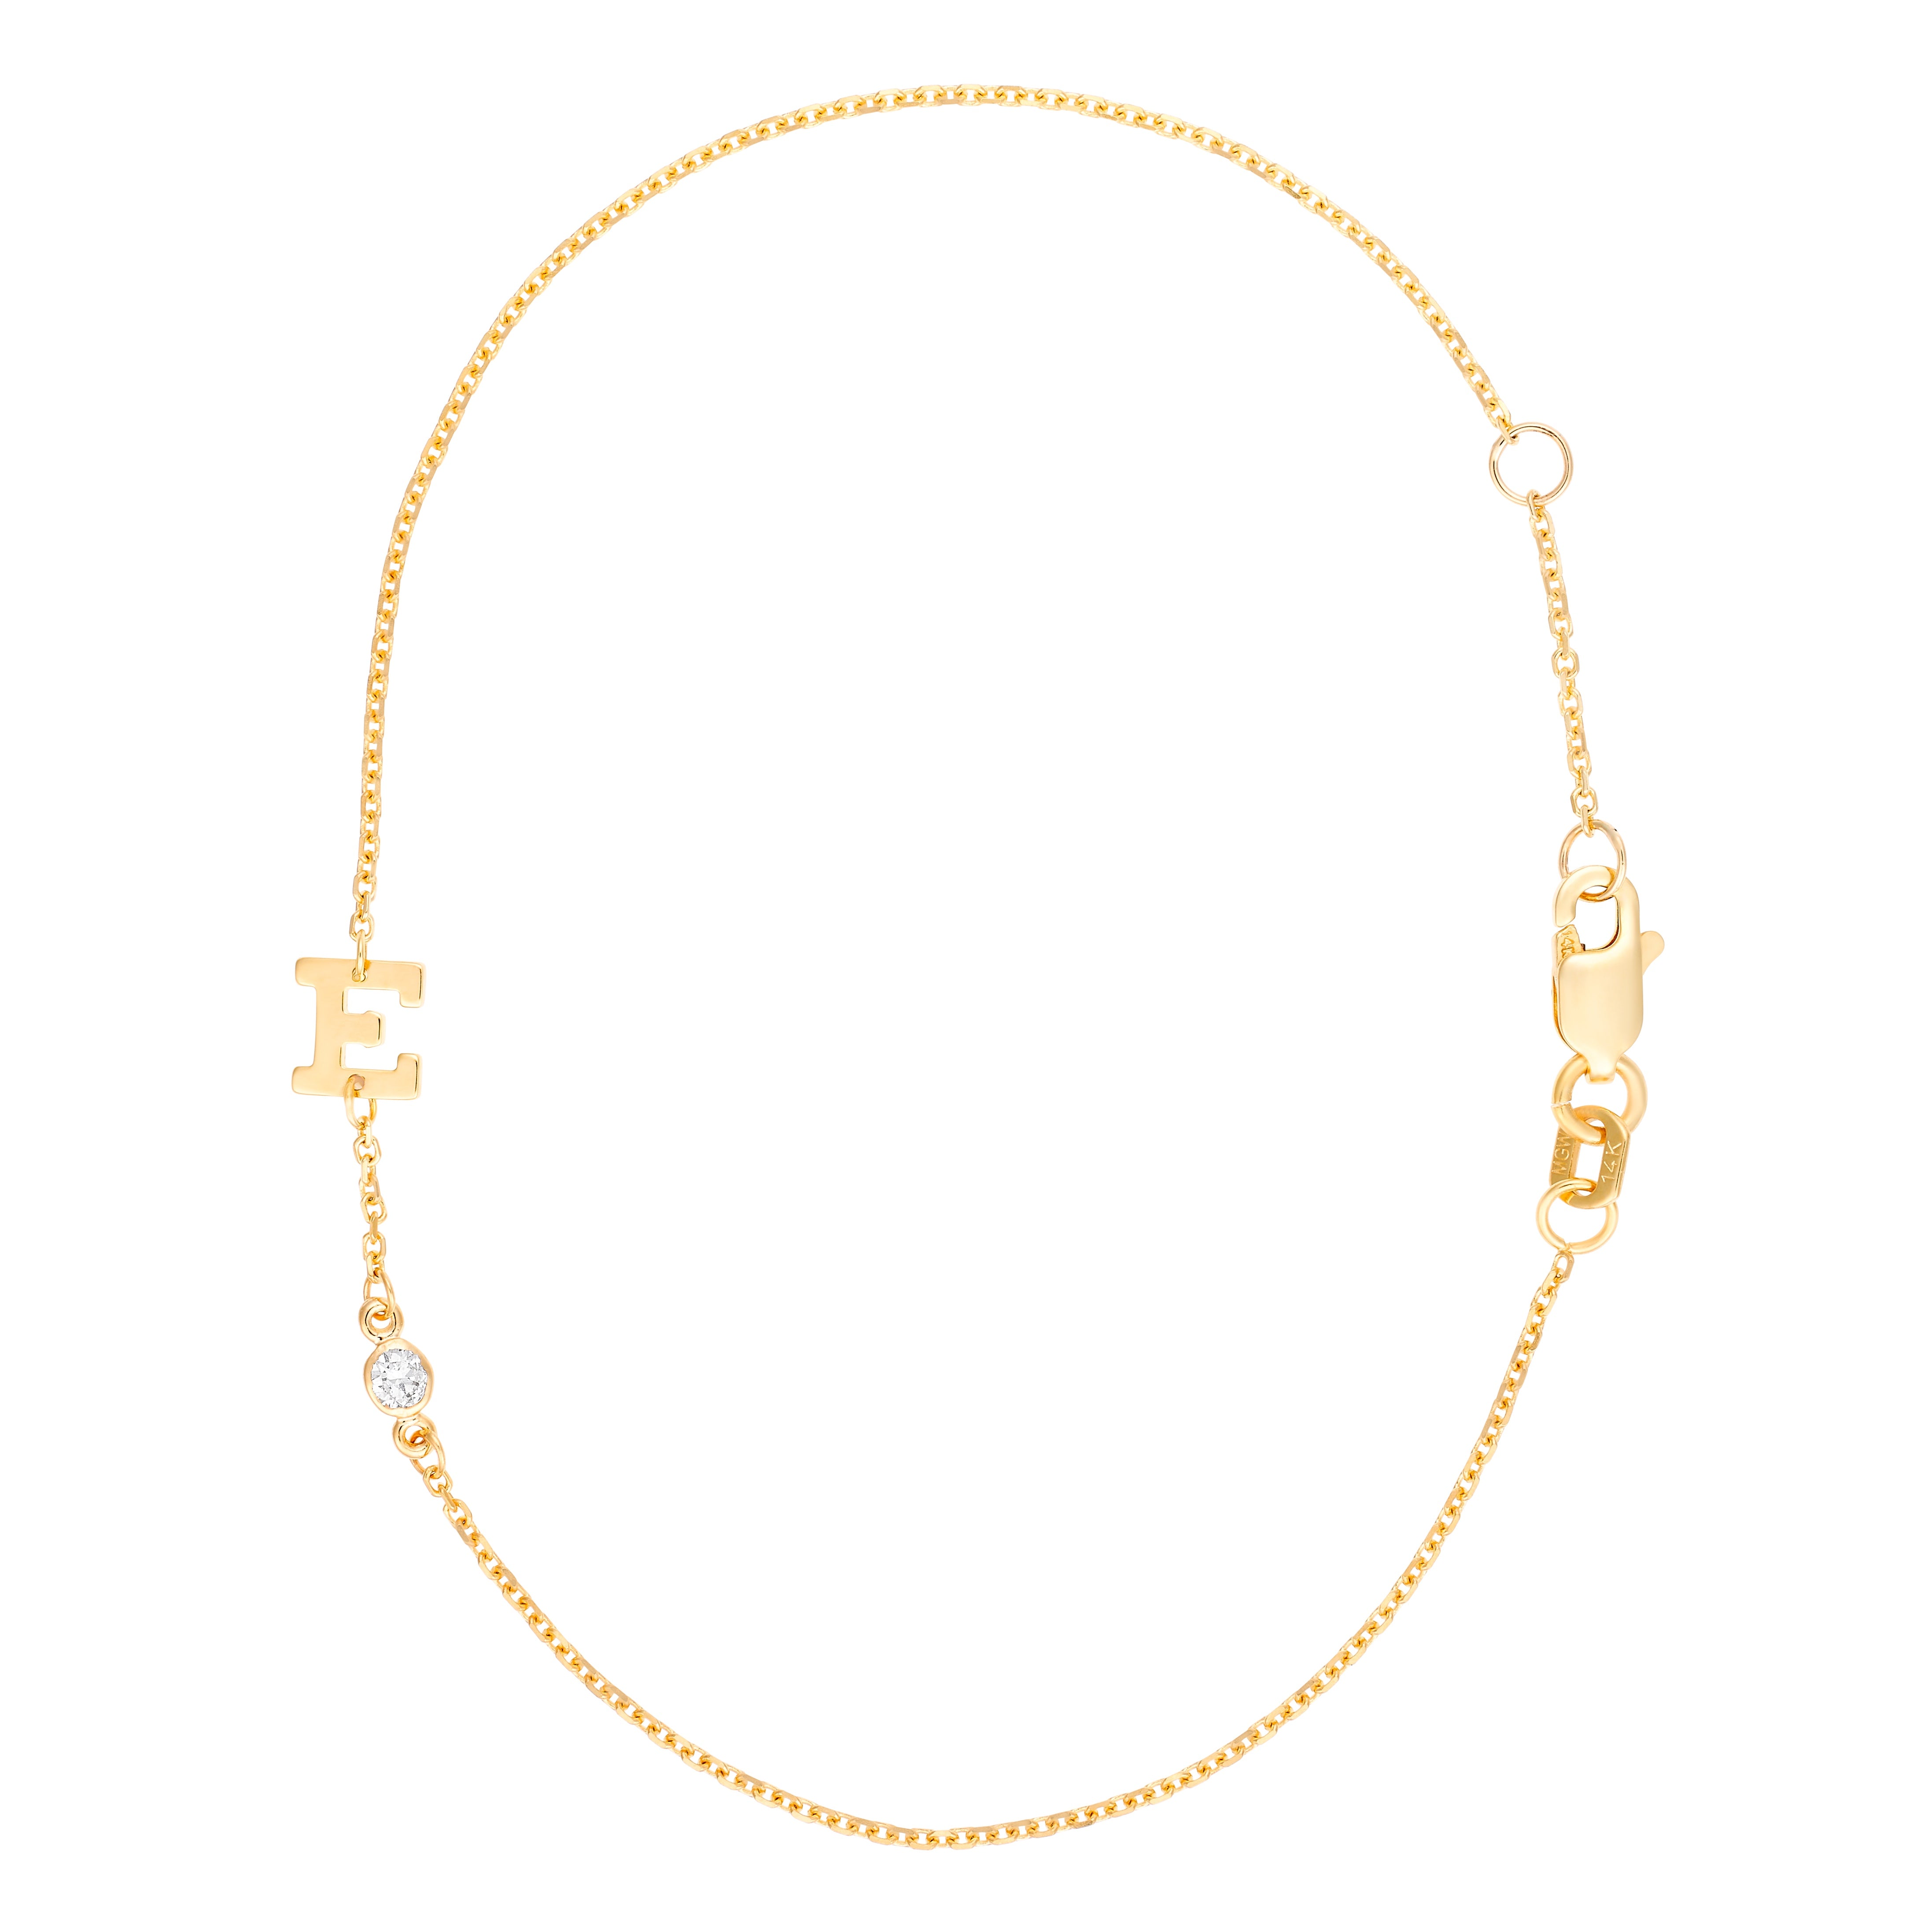 Gold Rush- Diamond Single Initial with Diamond Accent in Chain- Lola James Jewelry 